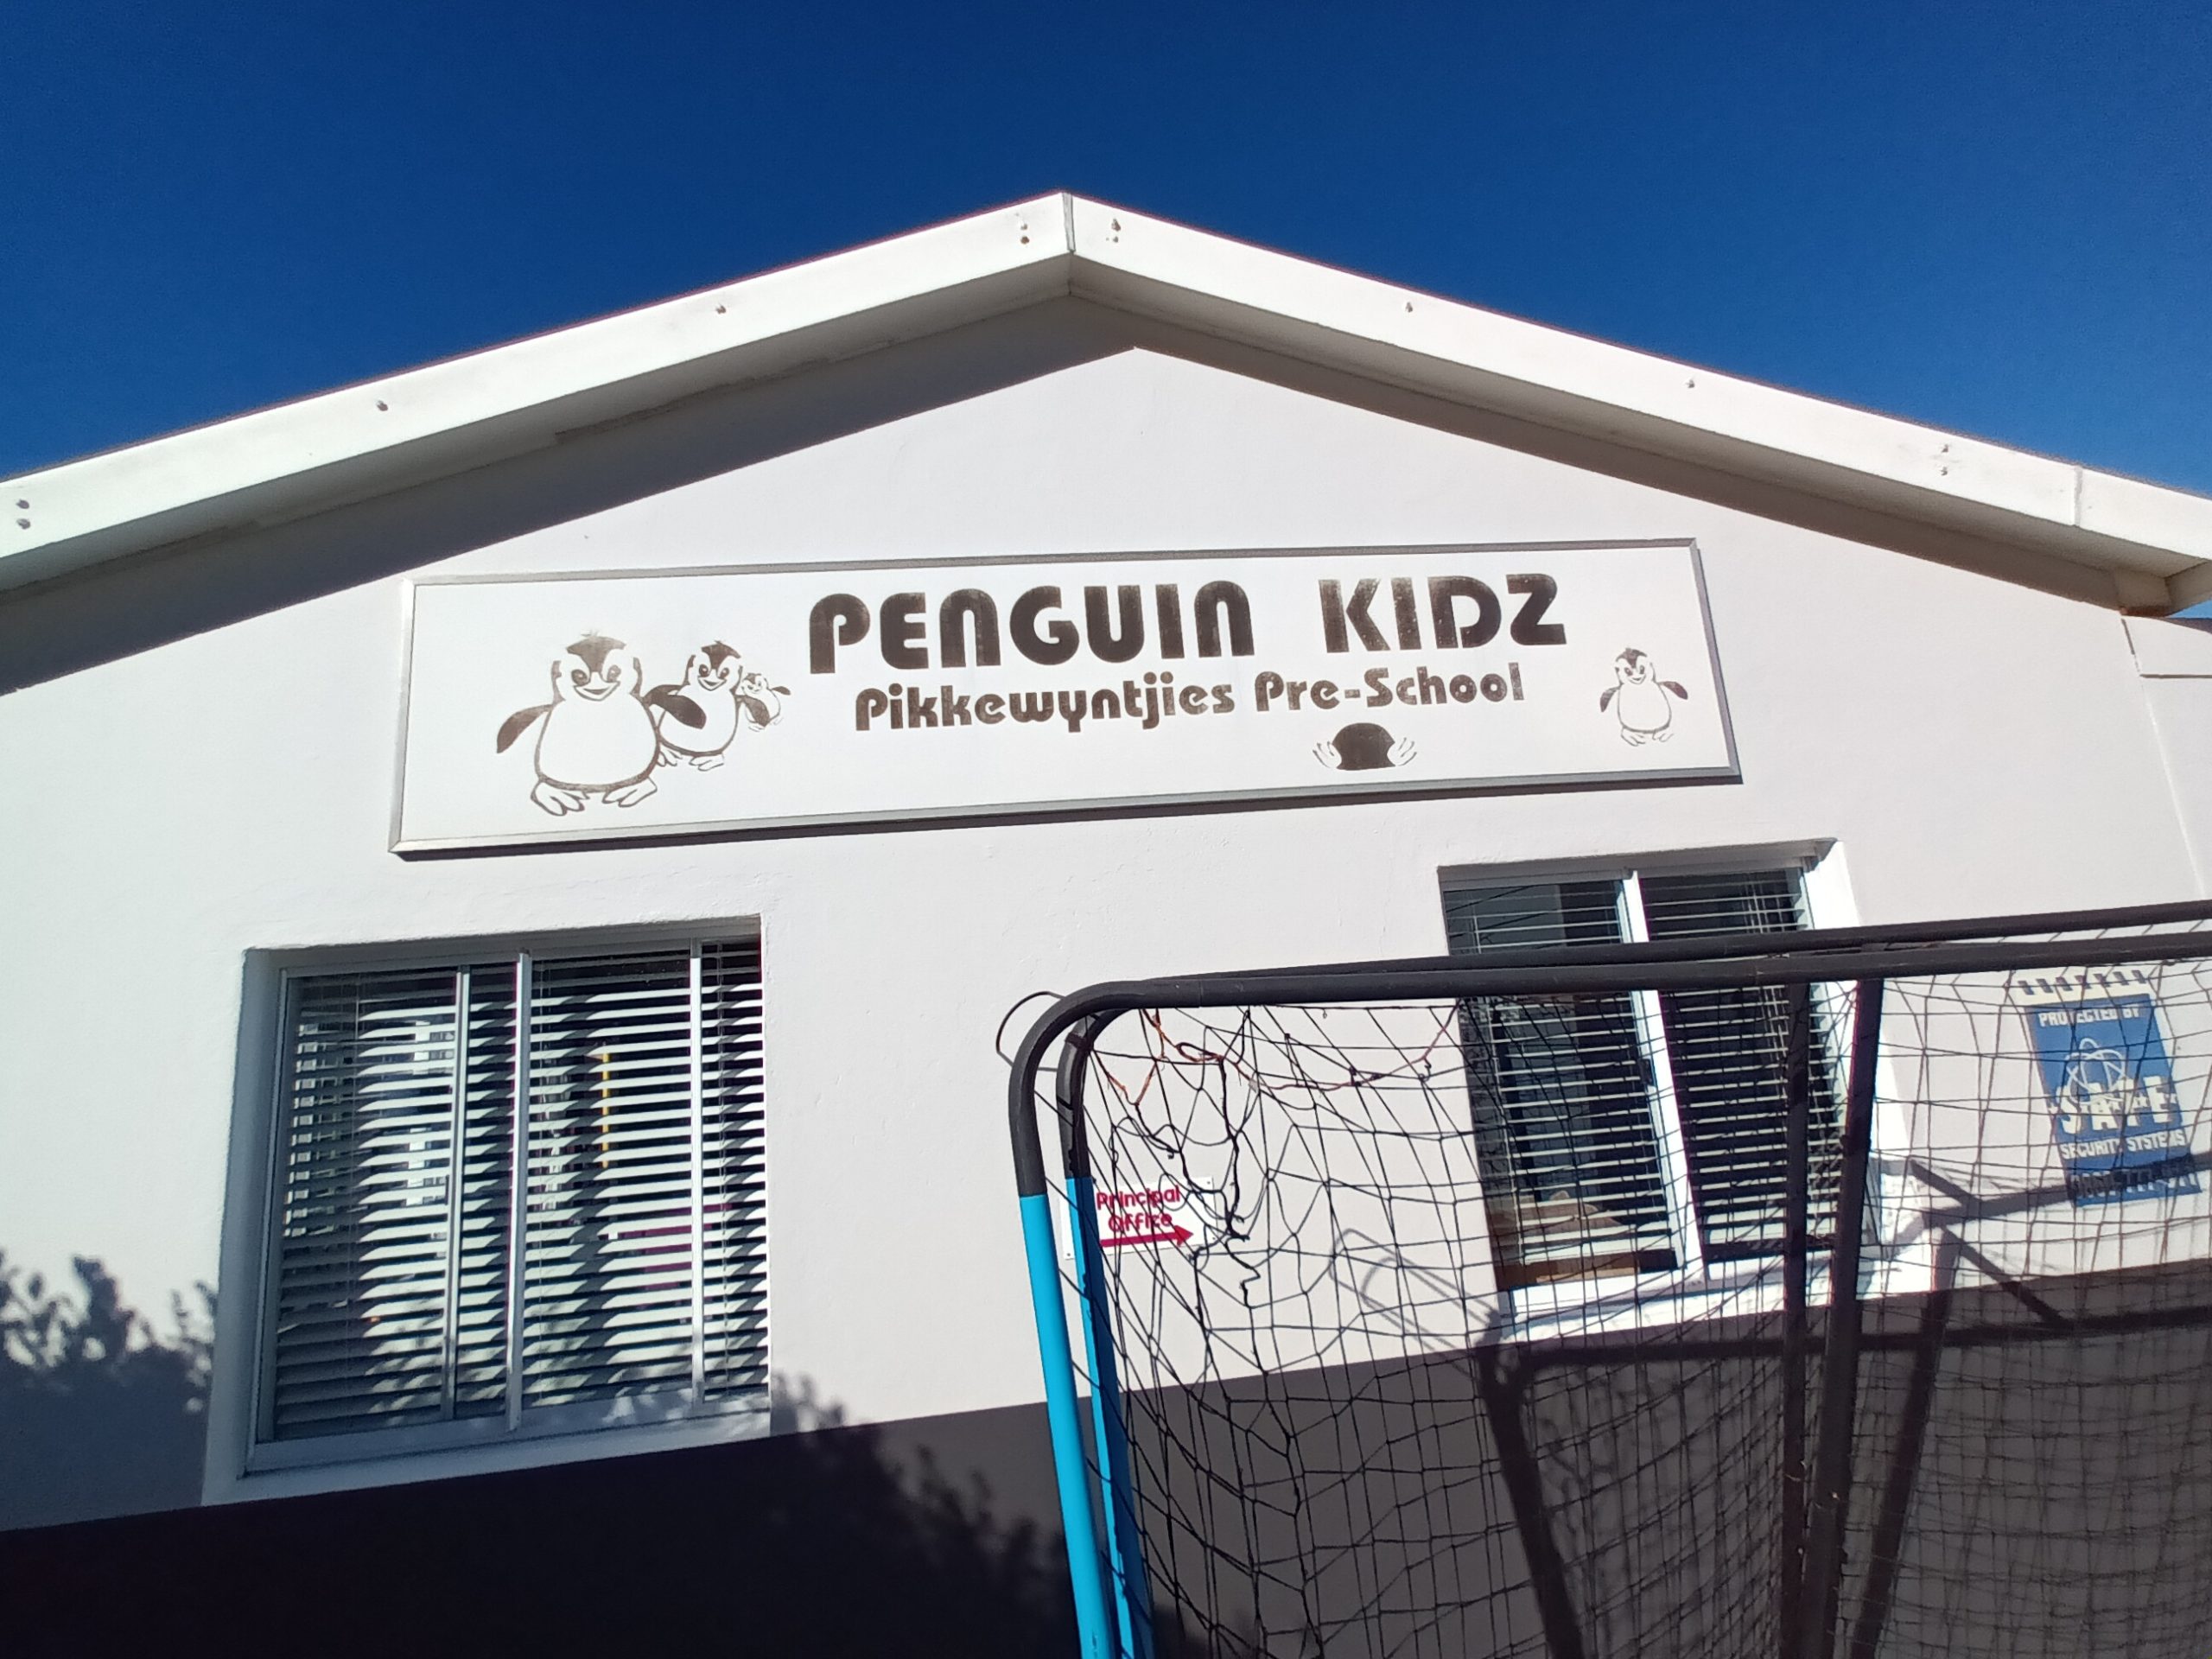 Pikkewyntjies Pre-Primary with Zaan Cilliers